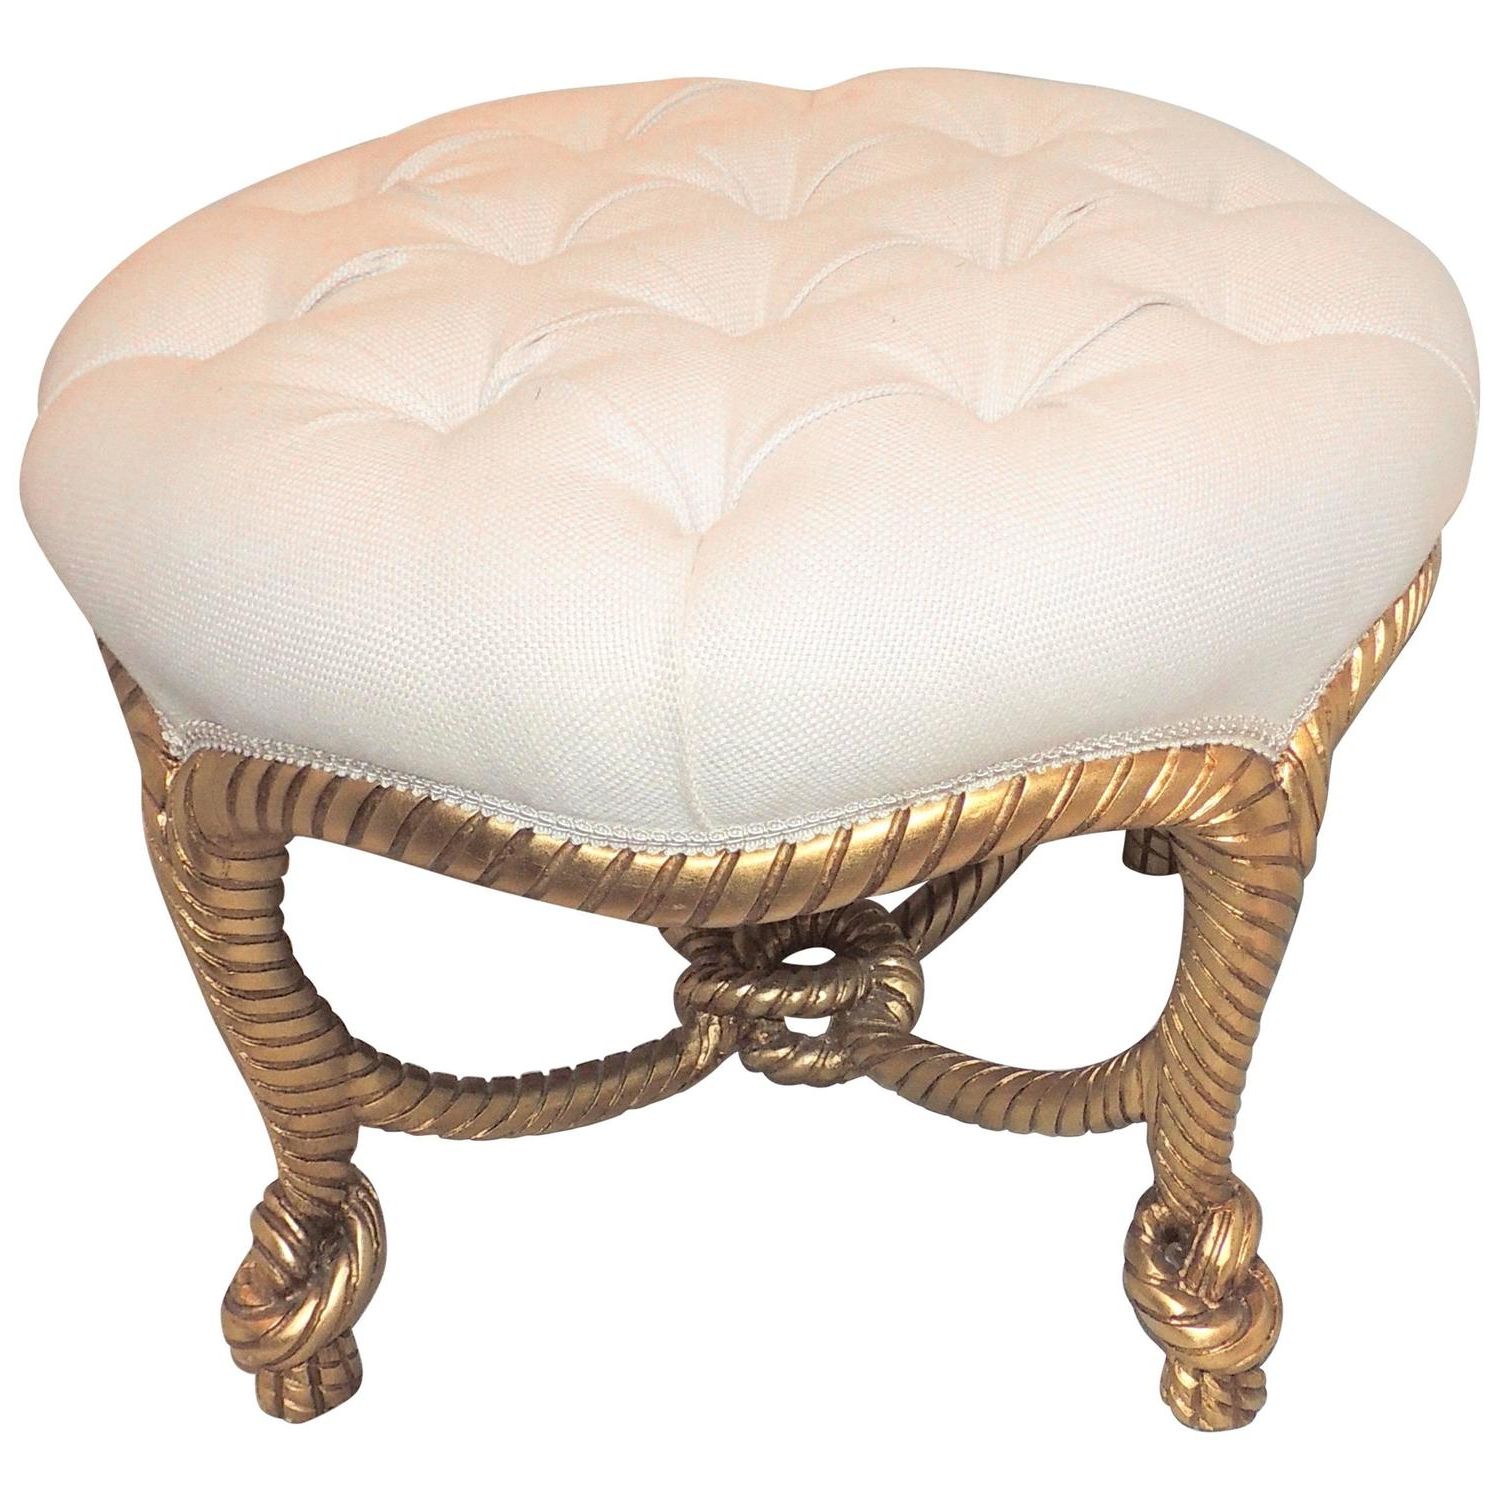 Trendy Wonderful French Gilt Wood Rope Tassel Bow Tufted Ottoman Round Bench With Round Cream Tasseled Ottomans (View 10 of 10)